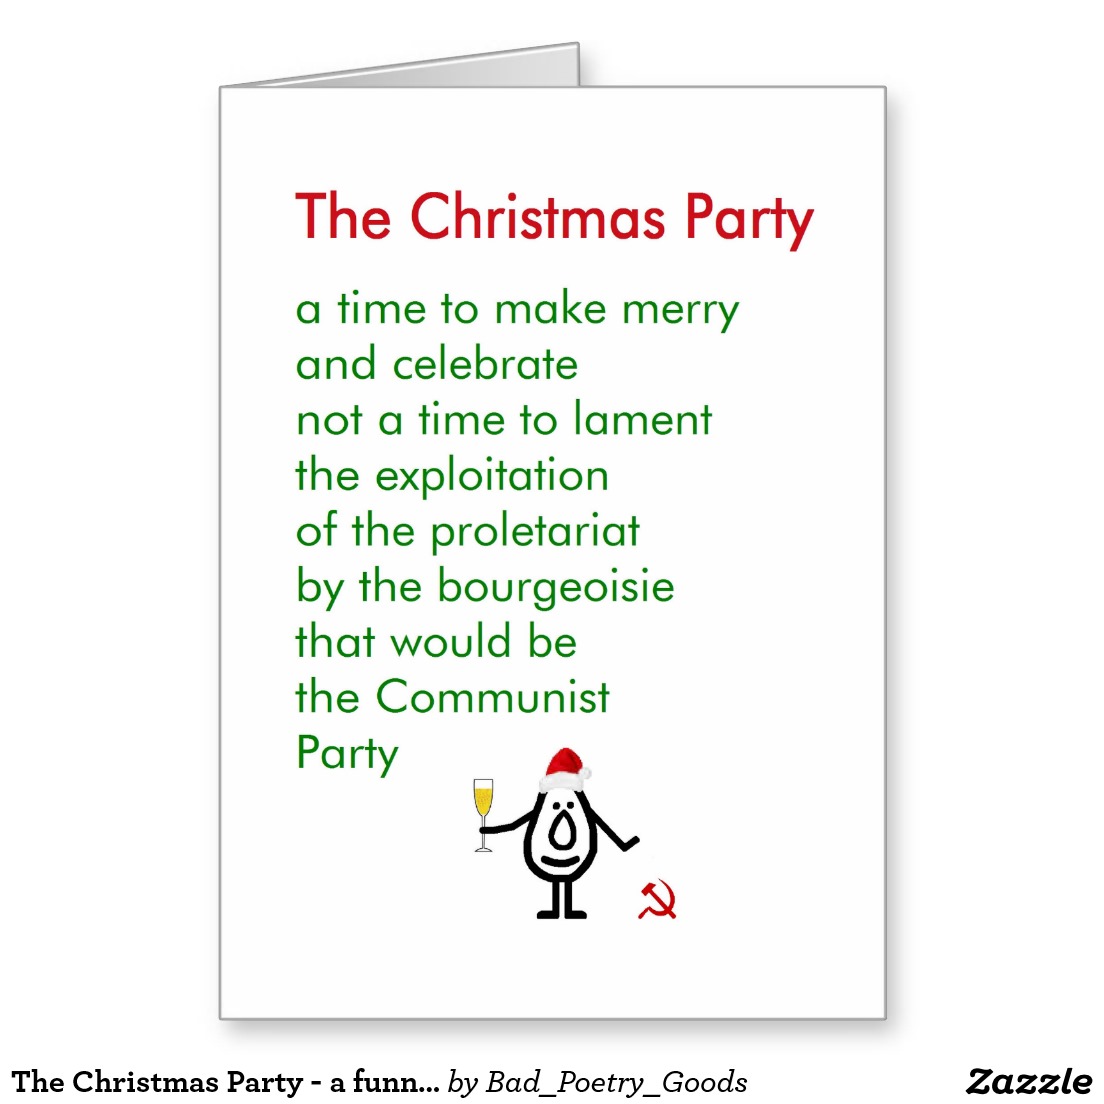 Funny Christmas Party Poem Image